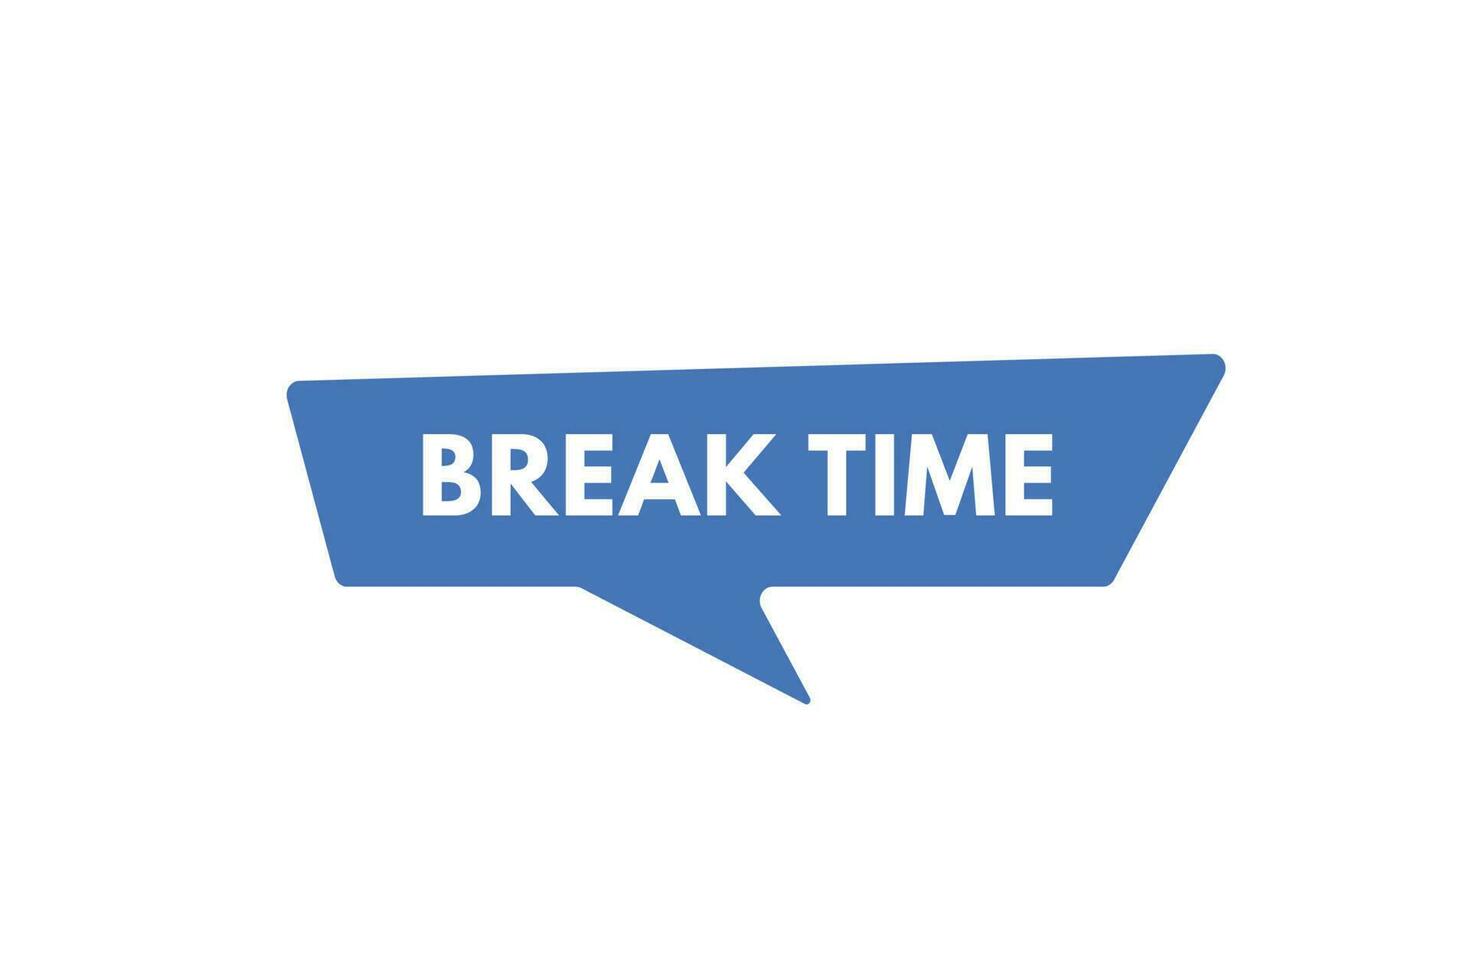 Break time text Button. Break time Sign Icon Label Sticker Web Buttons vector